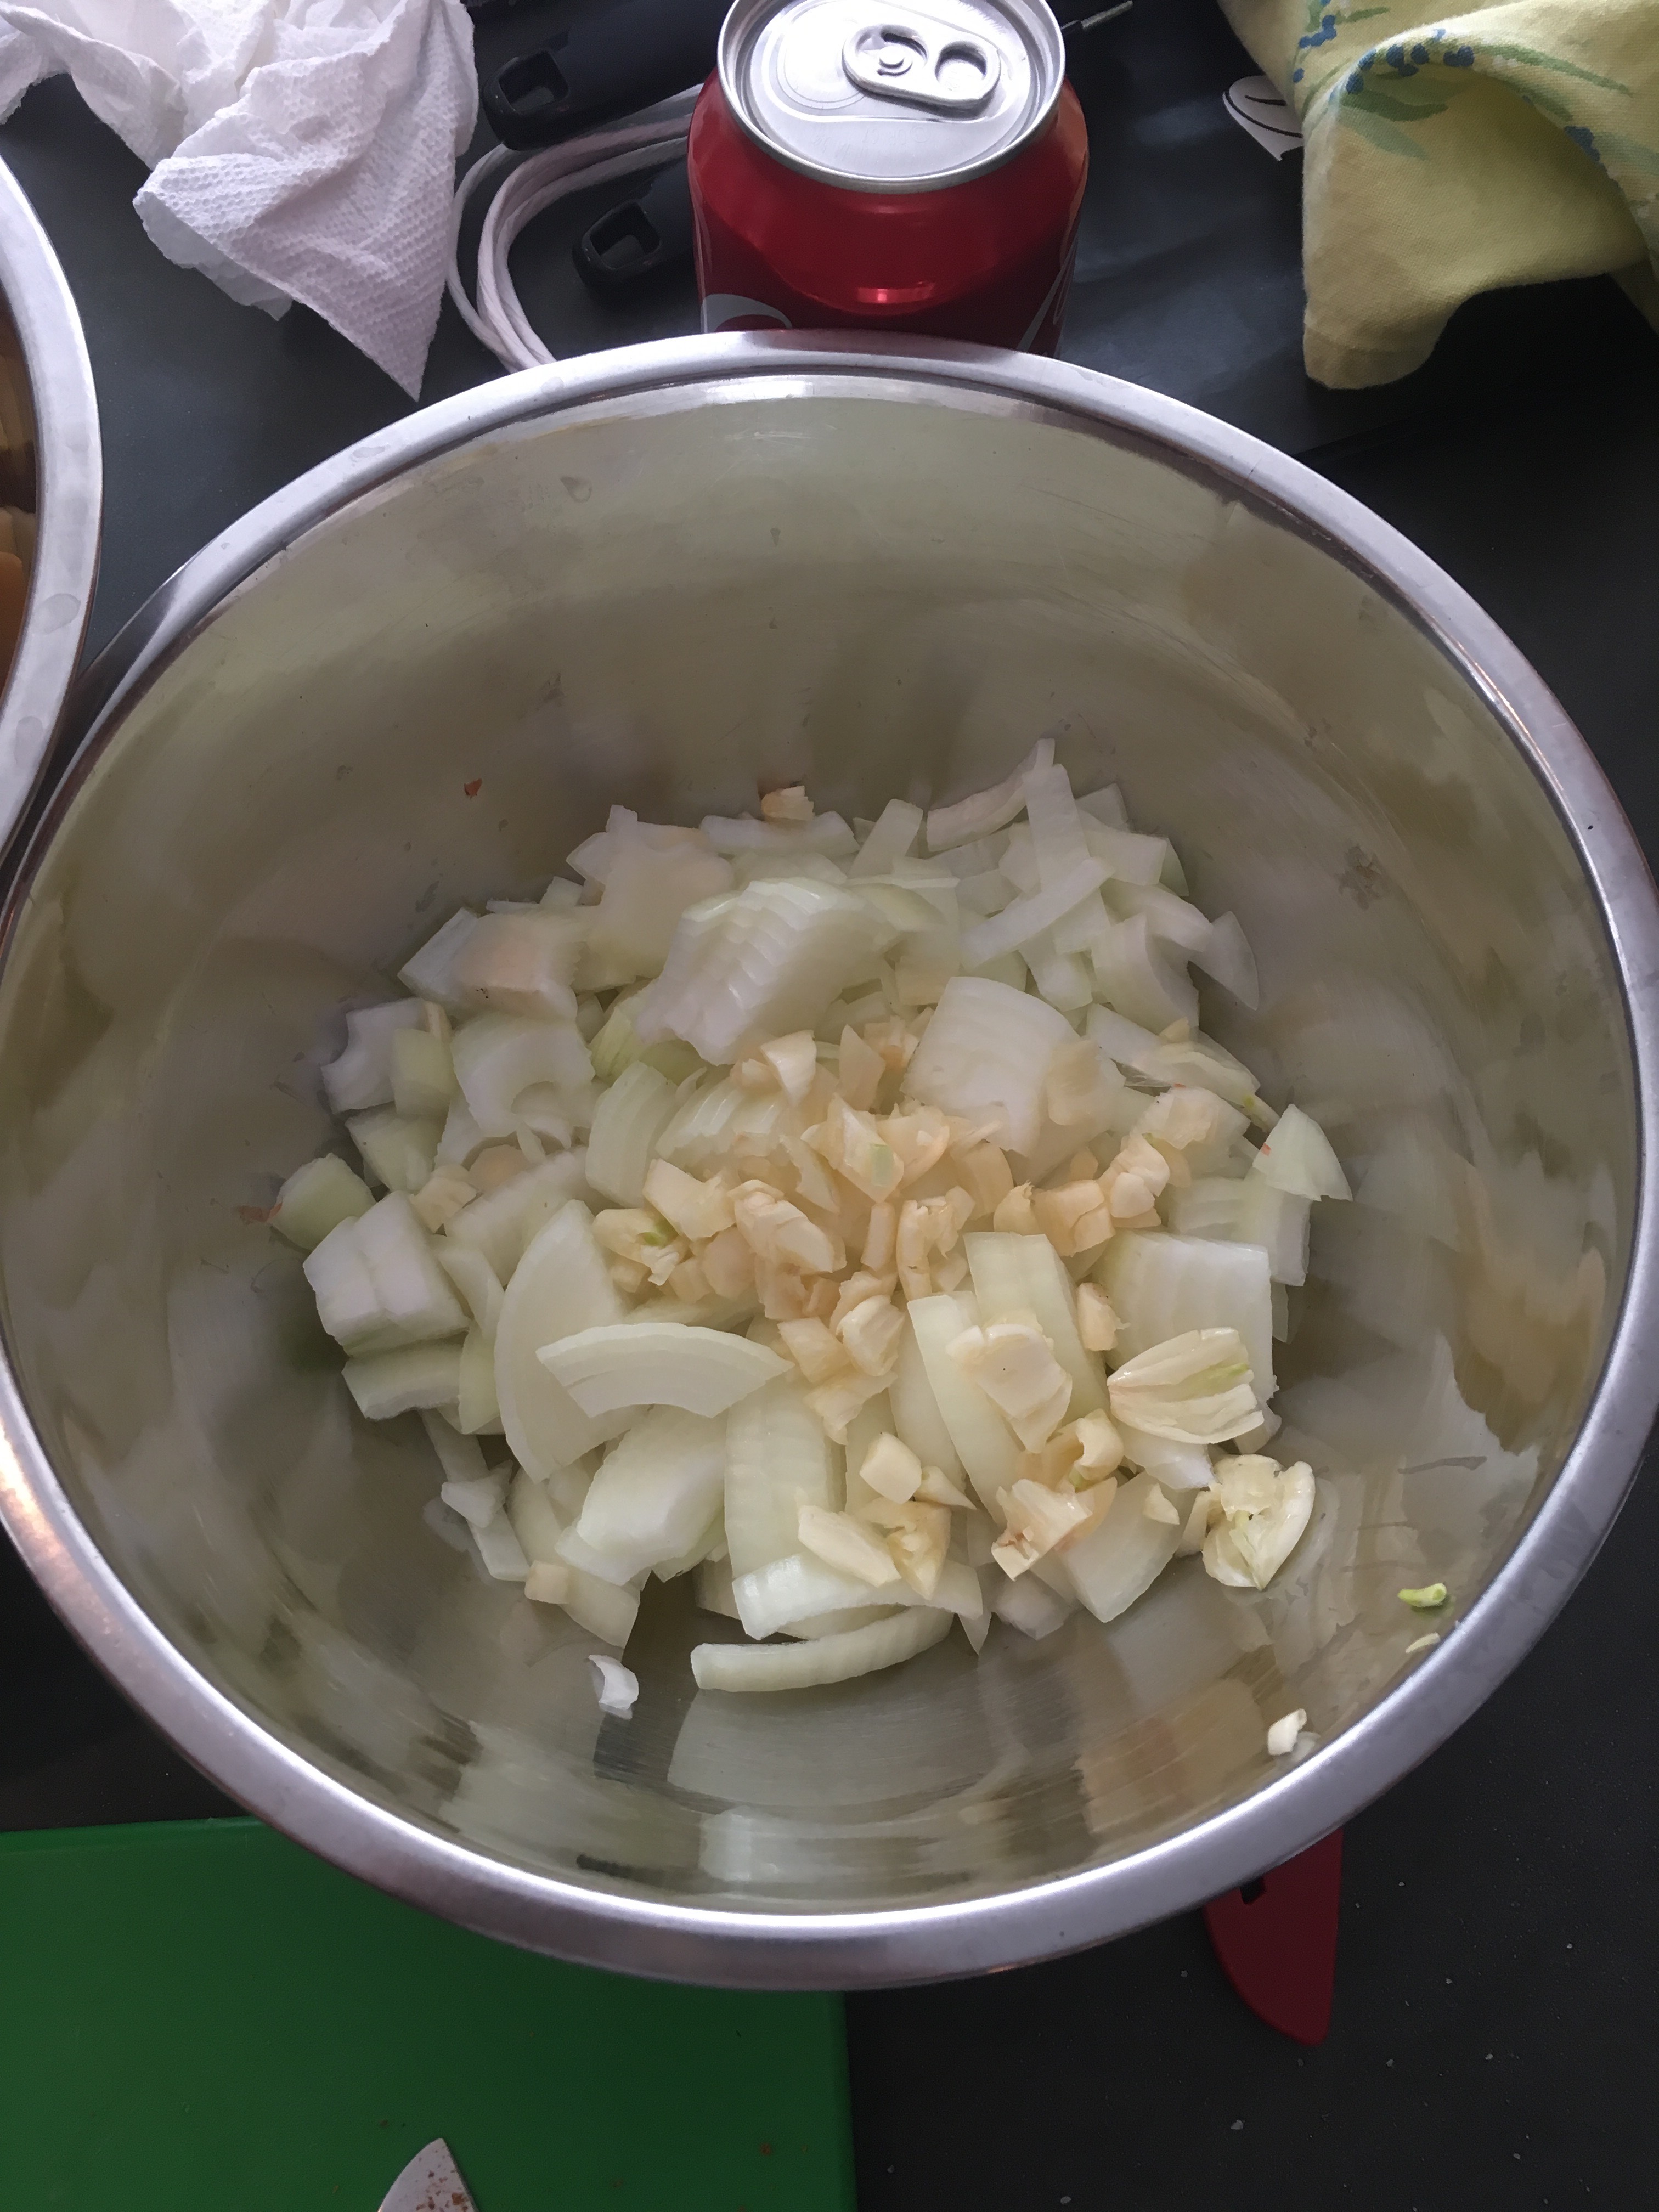 Chopped onions and garlic in a bowl